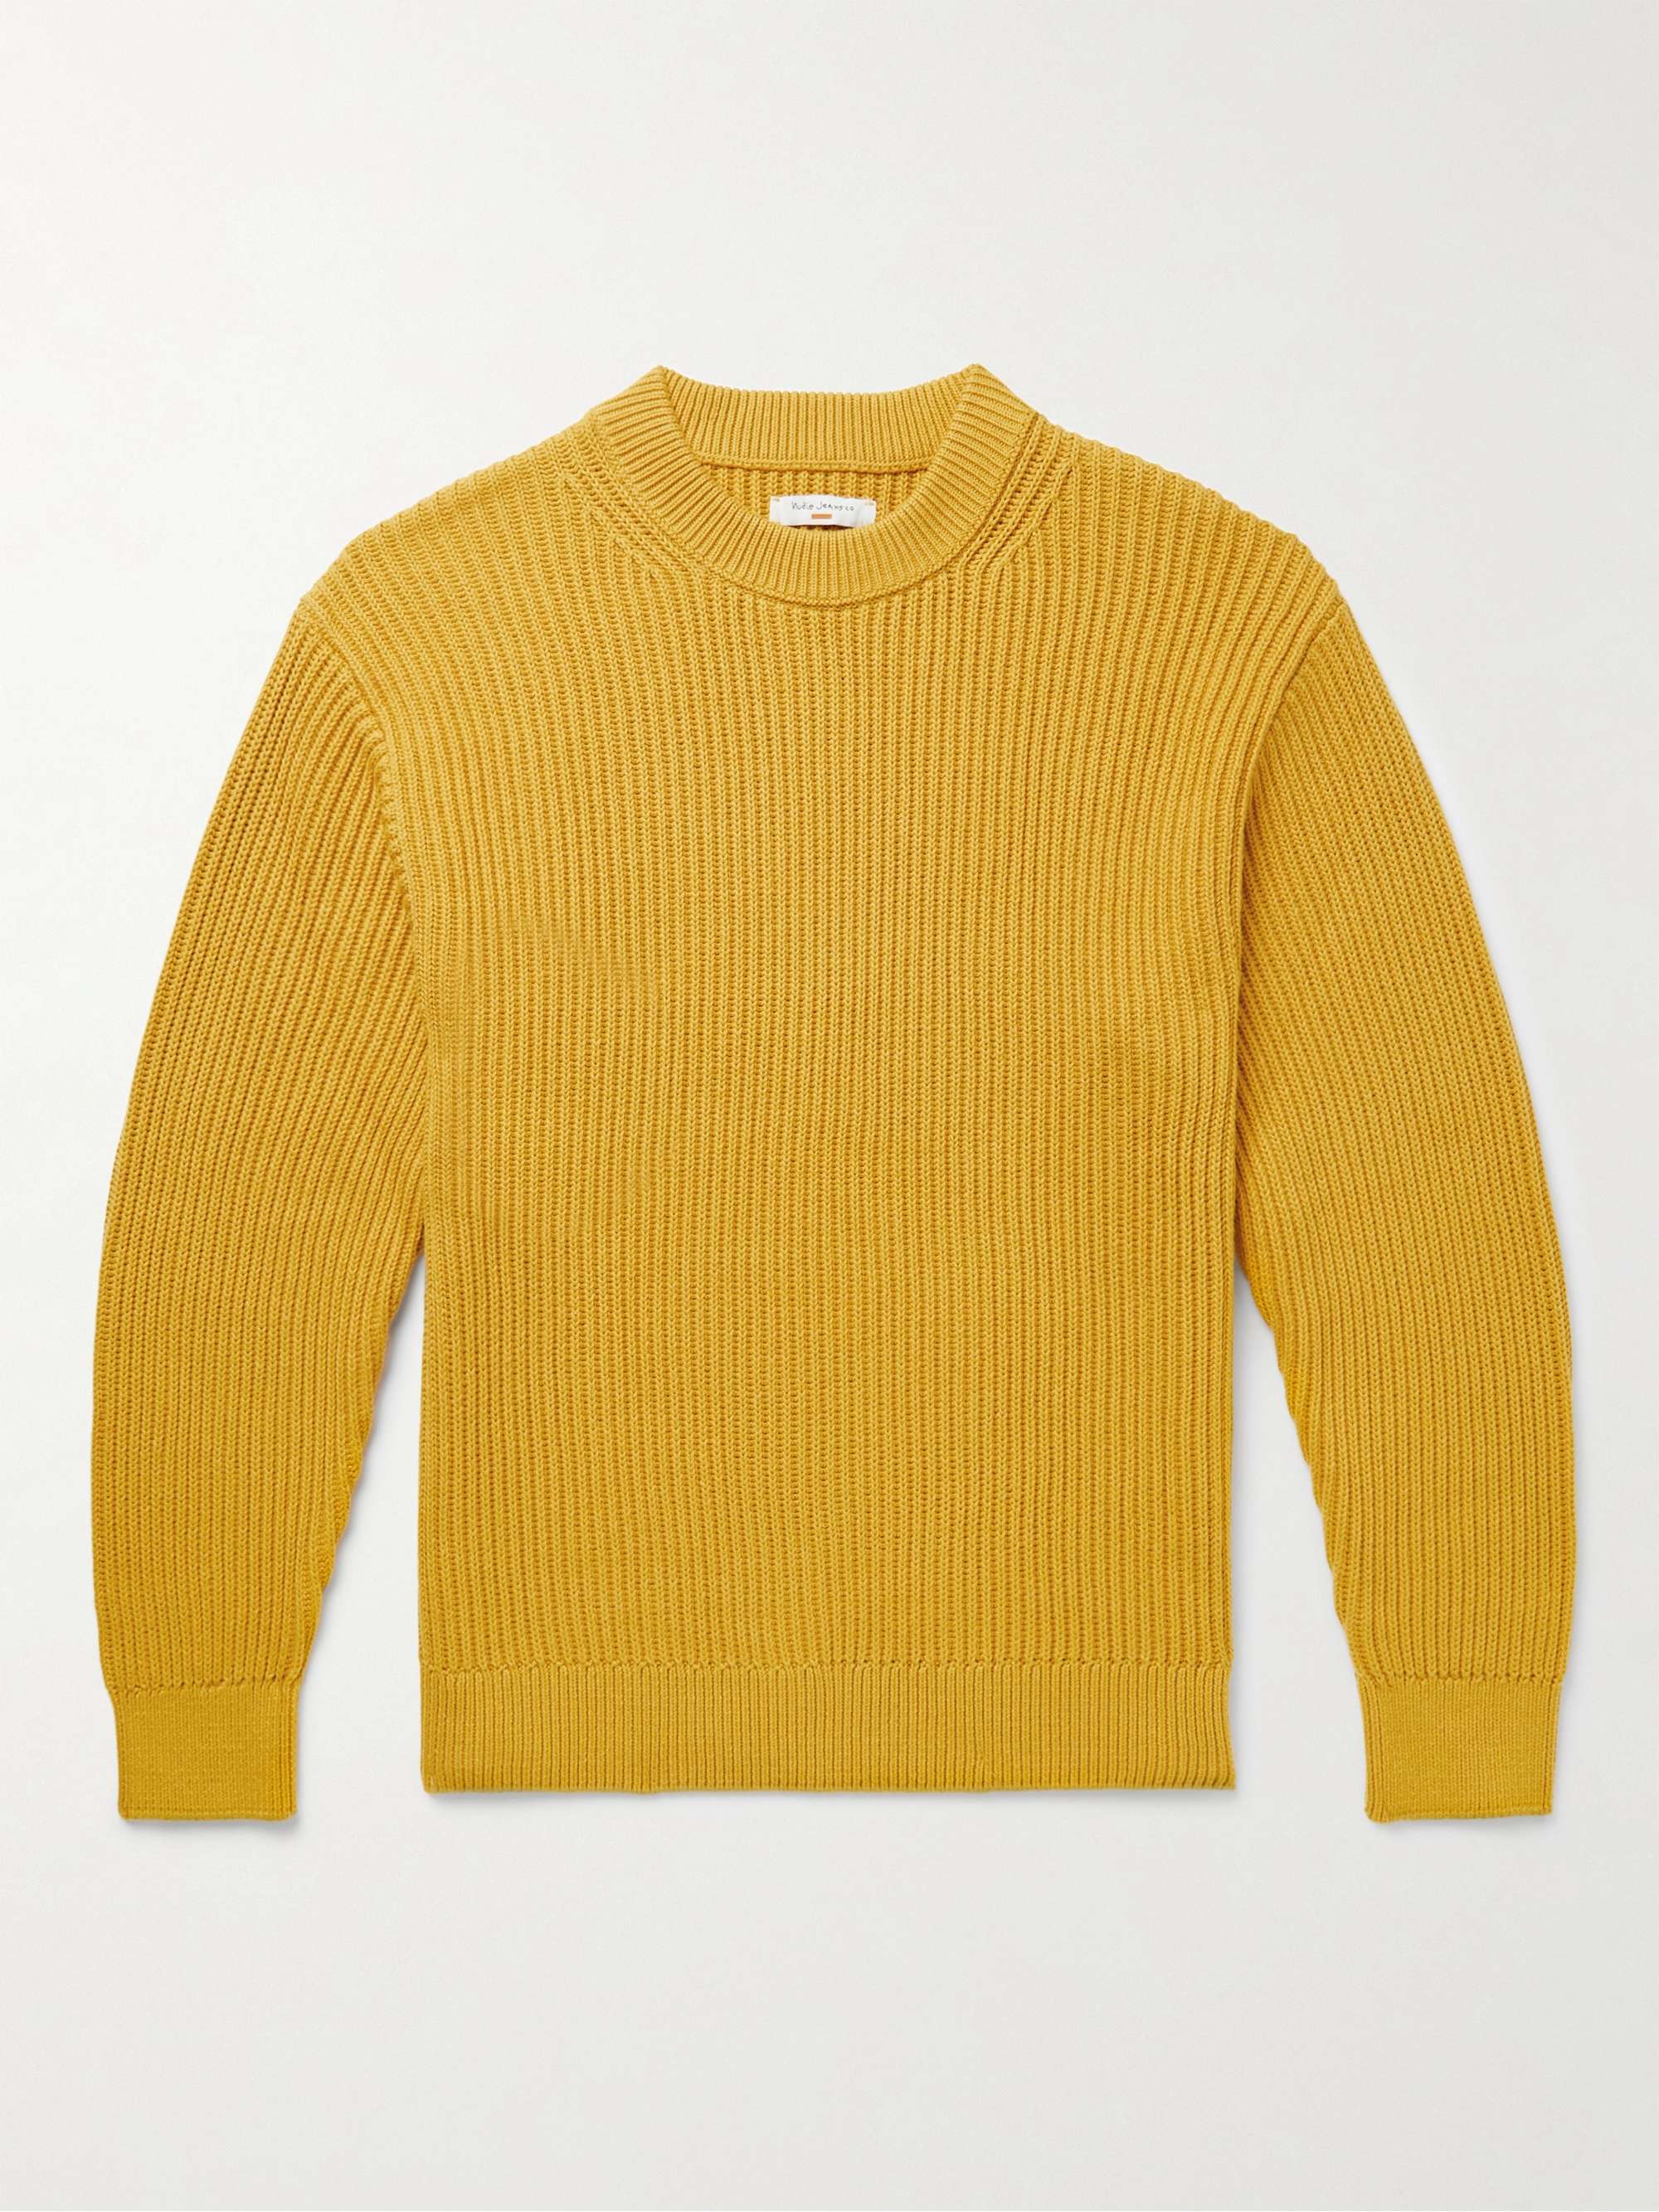 NUDIE JEANS Frank Ribbed Cotton Sweater for Men | MR PORTER